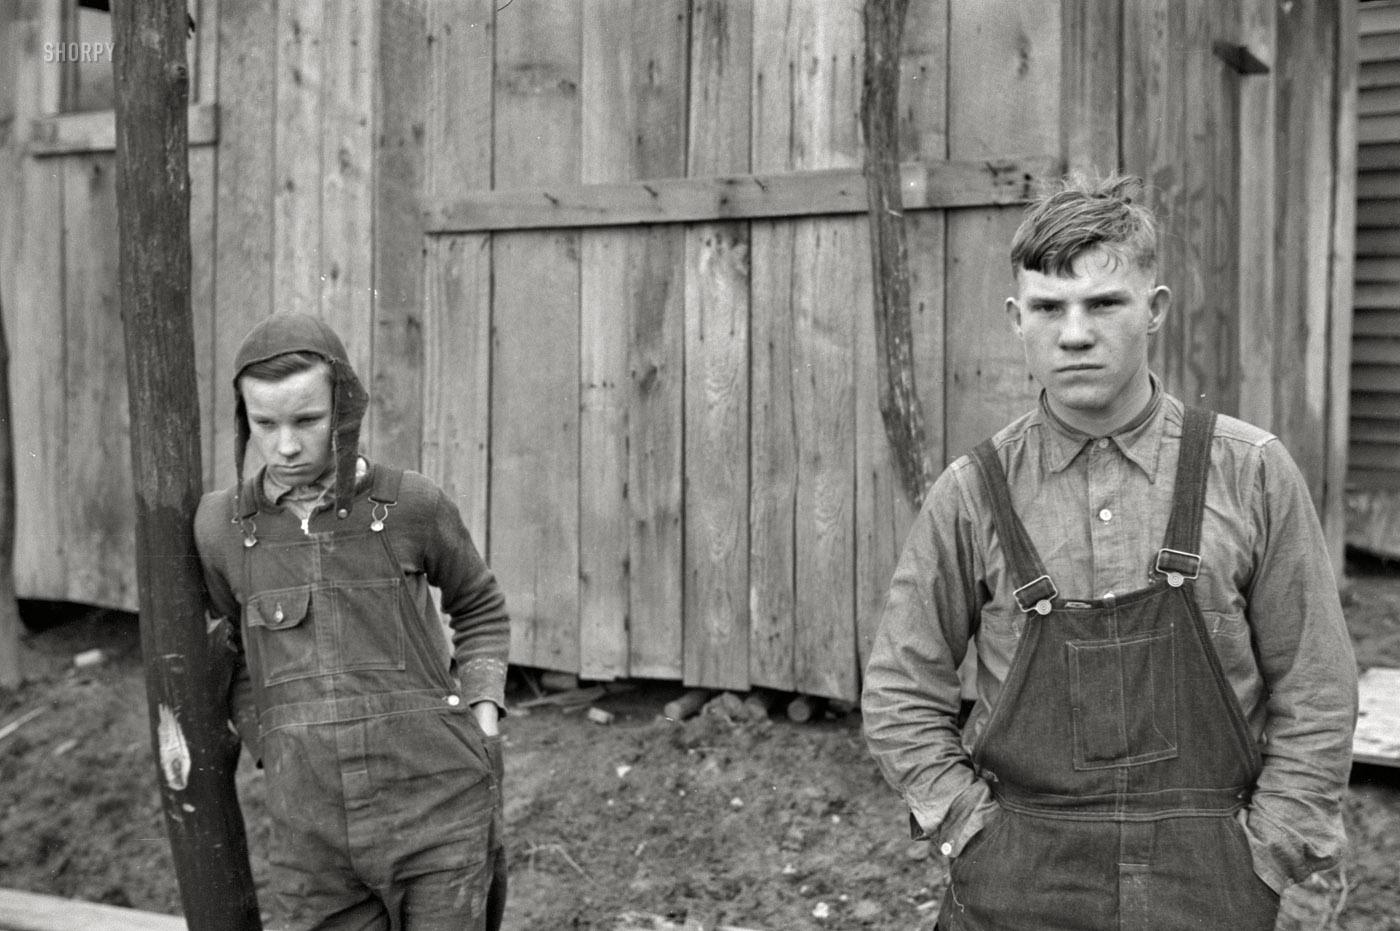 April 1936. "Farm boys. Jackson County, Ohio." 35mm nitrate negative by Theodor Jung for the Farm Security Administration. View full size.